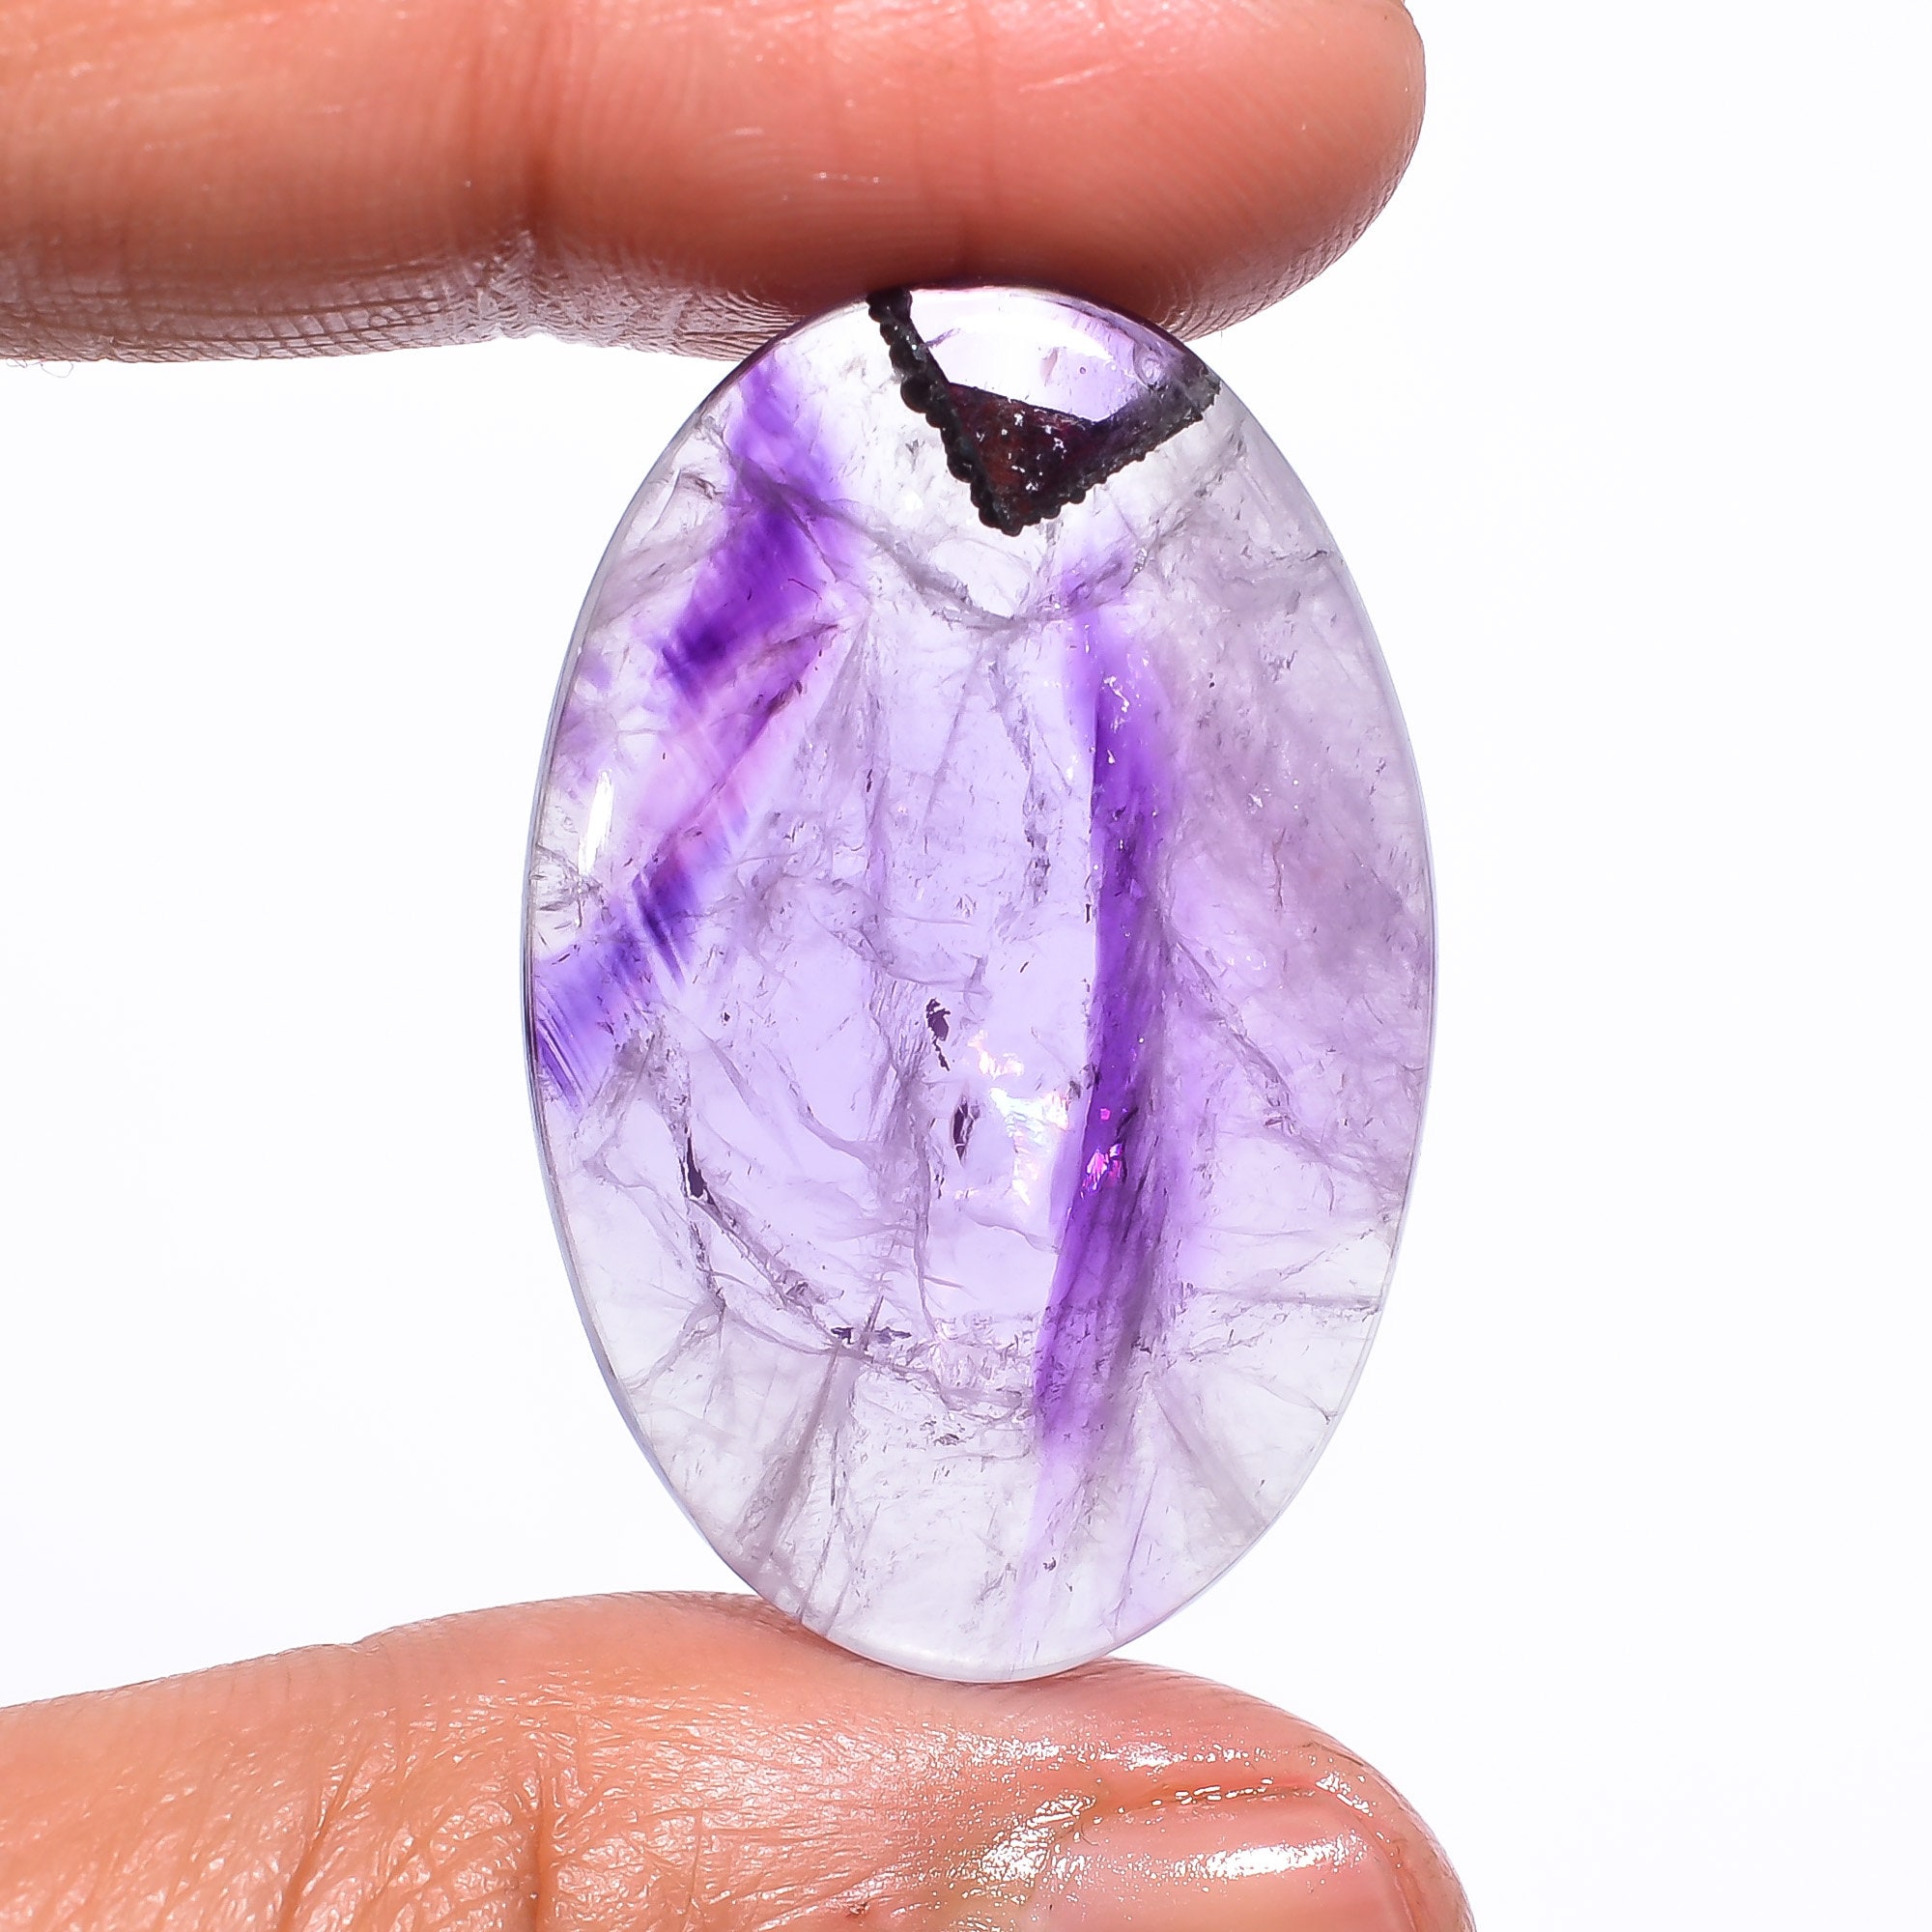 24X12X6 mm AW-653 Classic Top Grade Quality 100% Natural Trapiche Amethyst Oval Shape Cabochon Loose Gemstone For Making Jewelry 14 Ct